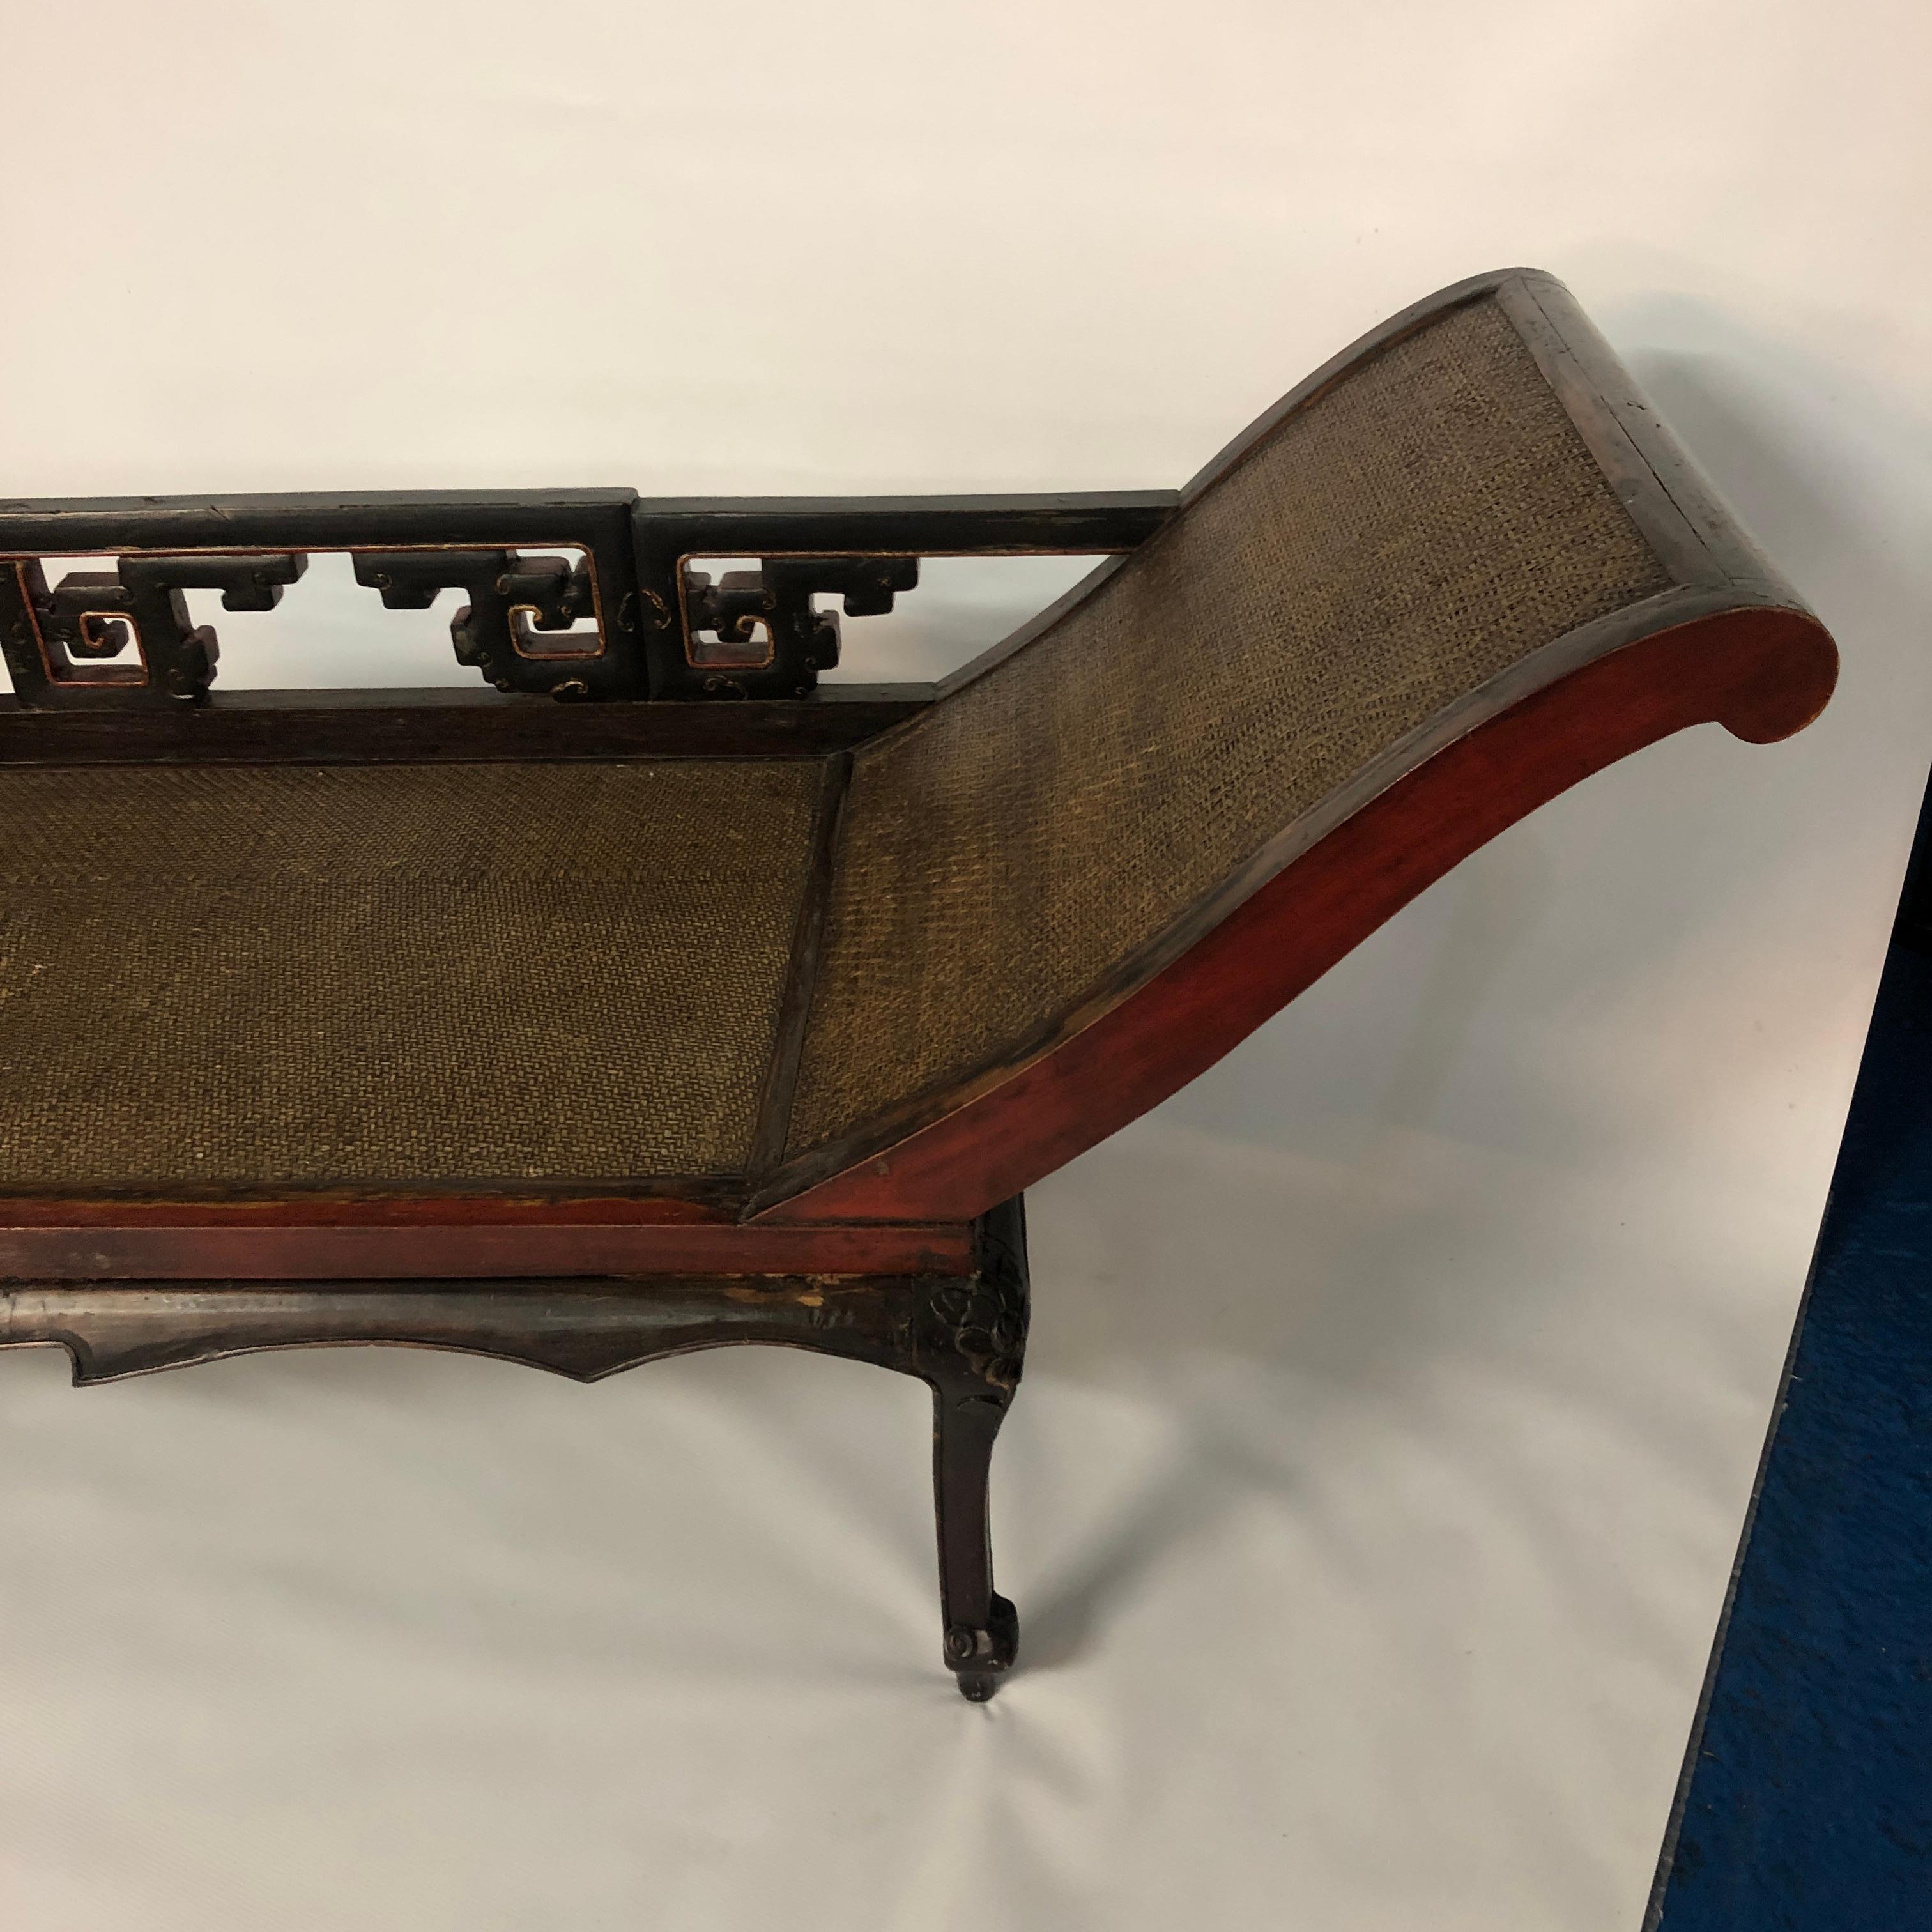 Chinese Hardwood Rattan Daybed Antique Qing Chaise Lounge Victorian Regency 1890 For Sale 5